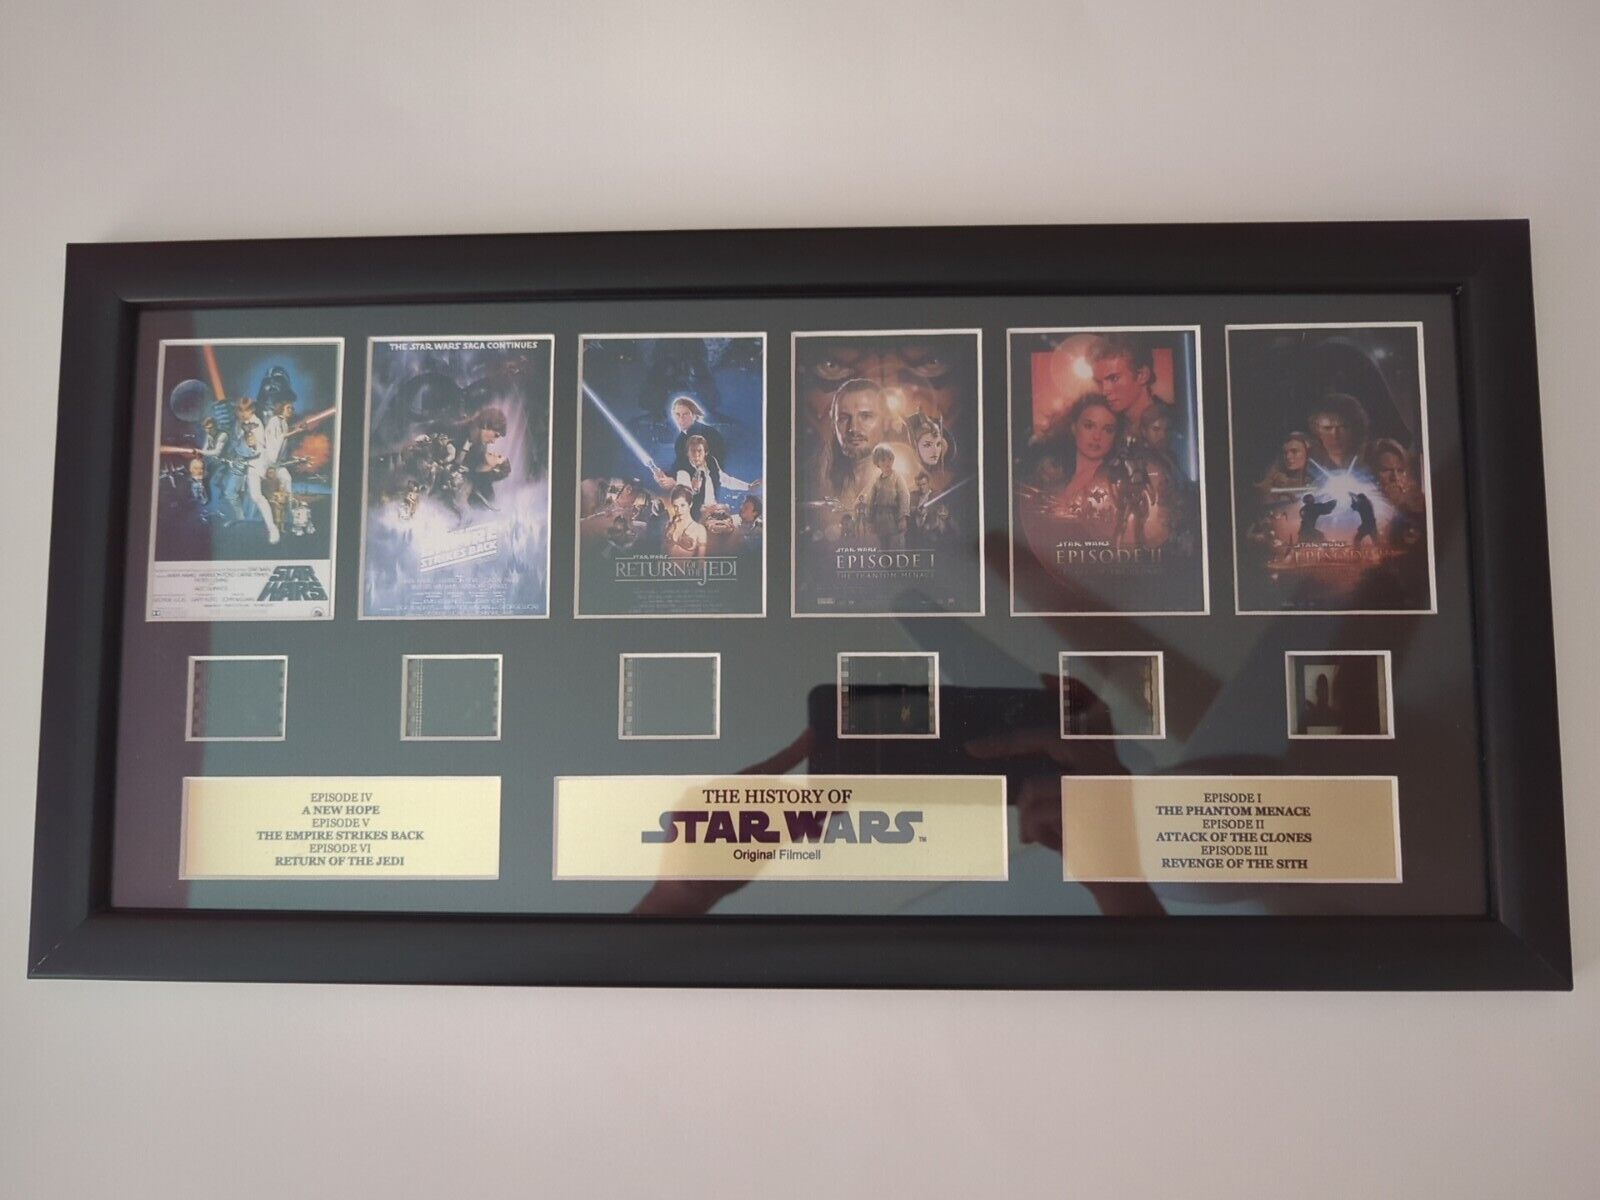 Rare Star Wars original filmcell With Certificate Of Authenticity 